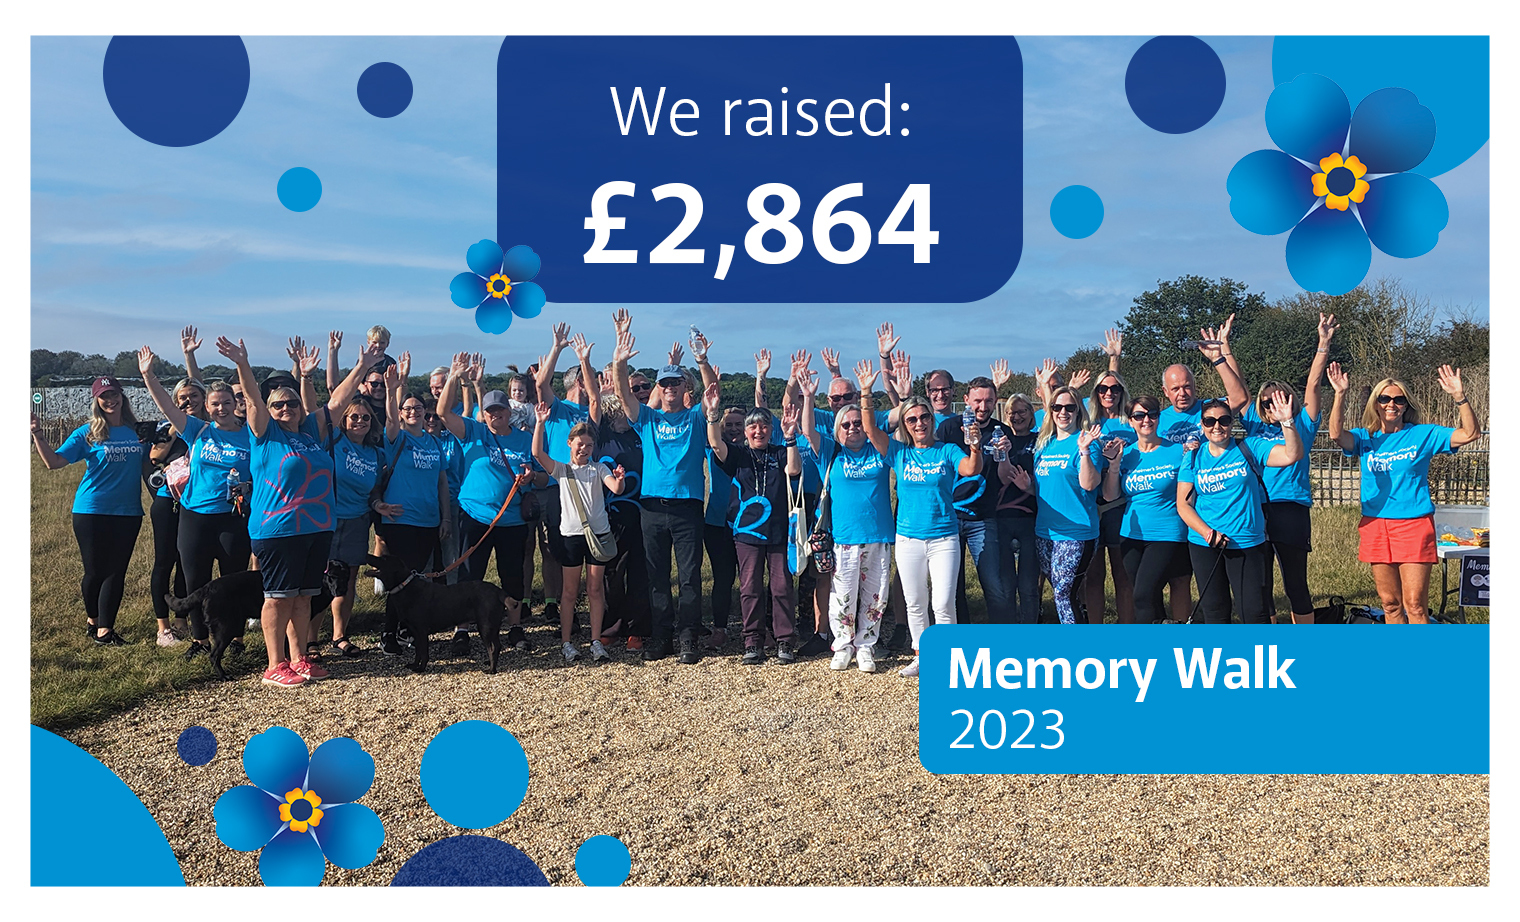 Prime Appointments staff wearing Blue Memory Walk T-shirts in aid of Alzheimers, Raising £2,864 for the event